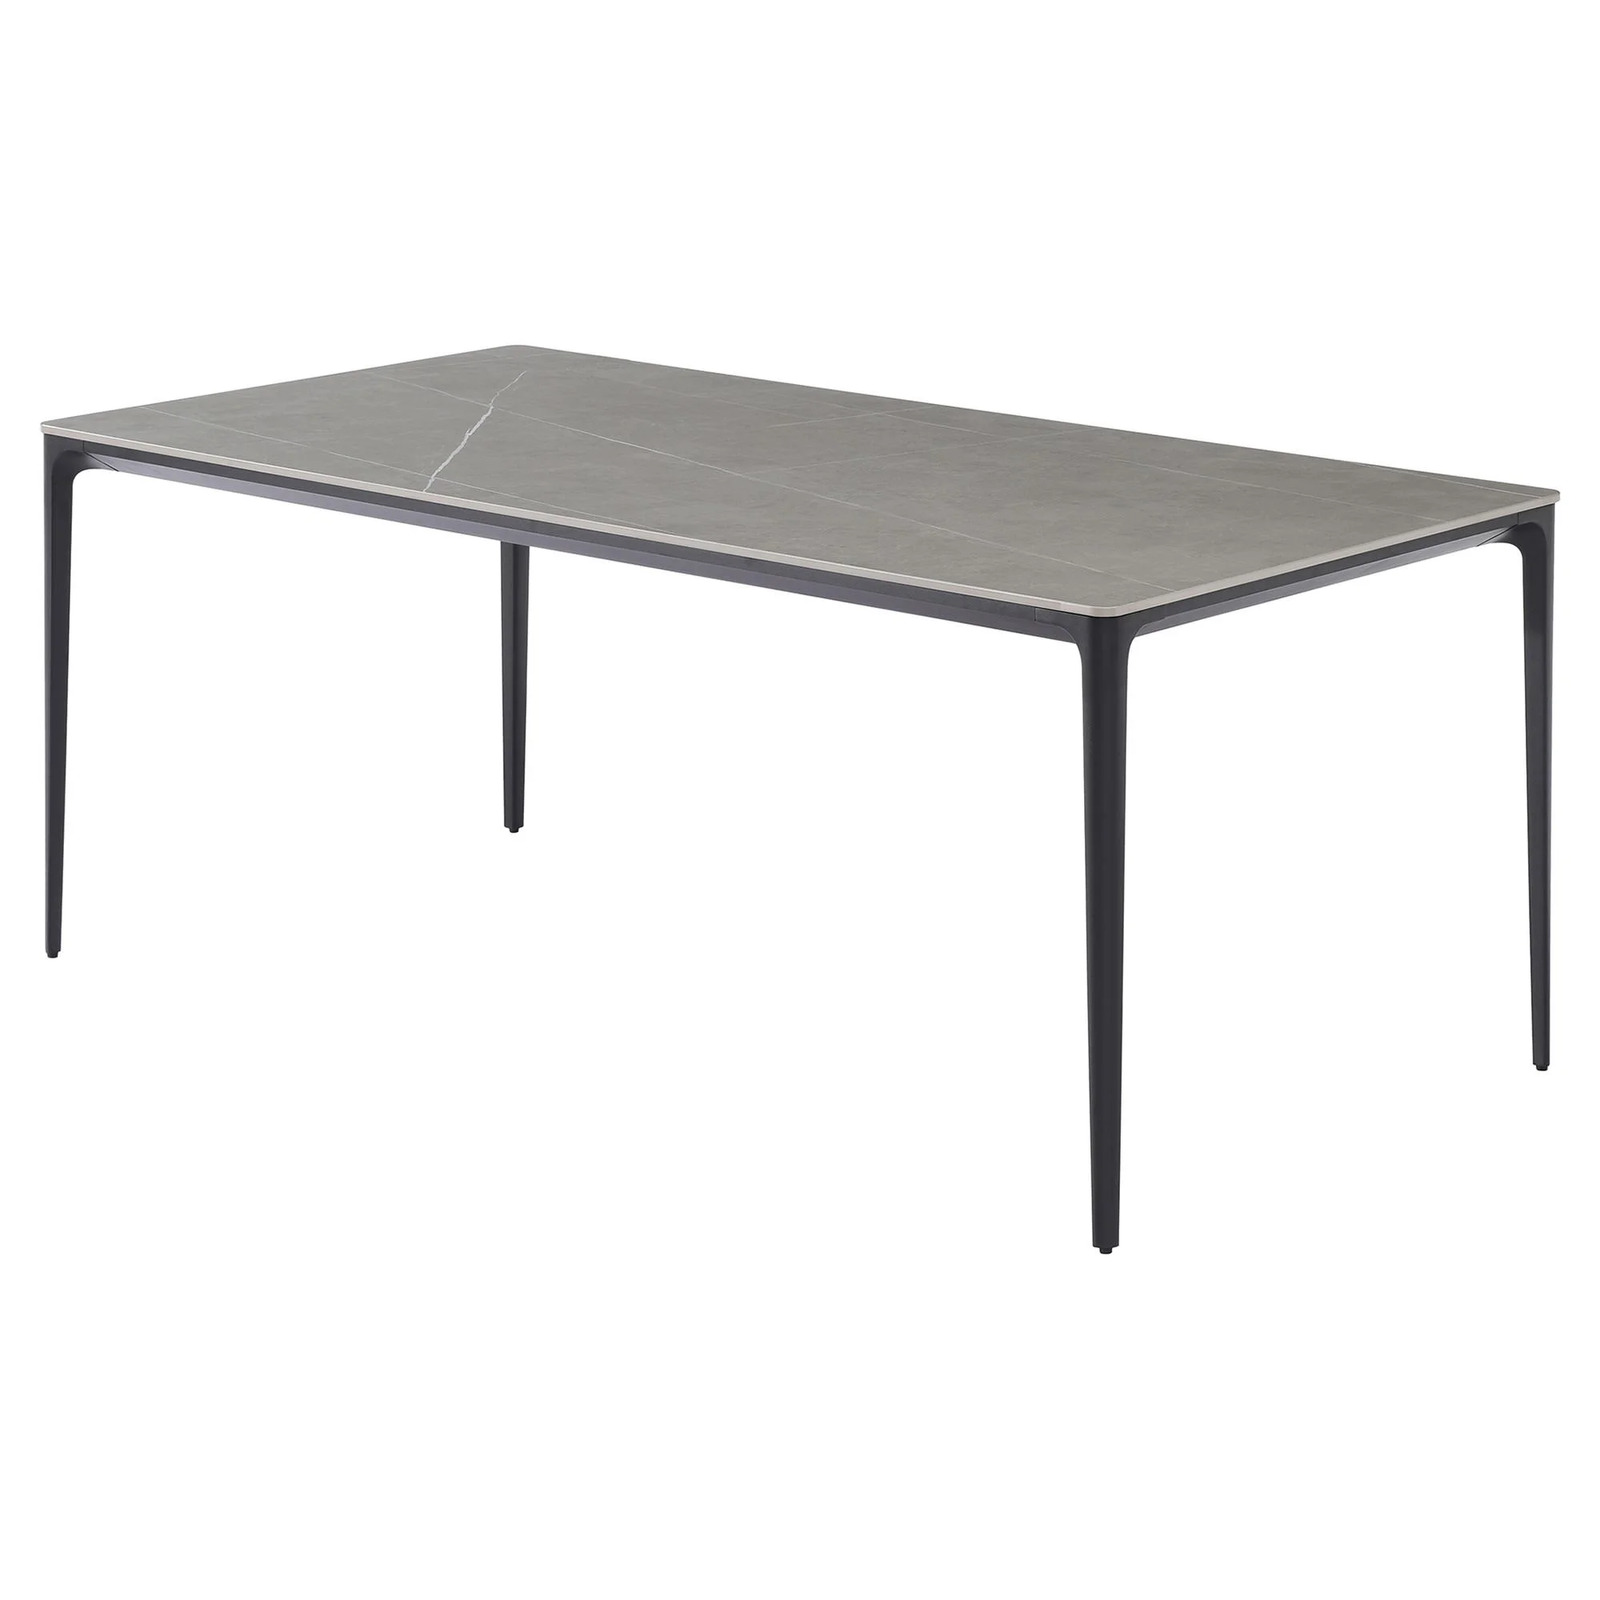 Quay Ceramic Glass Outdoor Dining Table Cement 